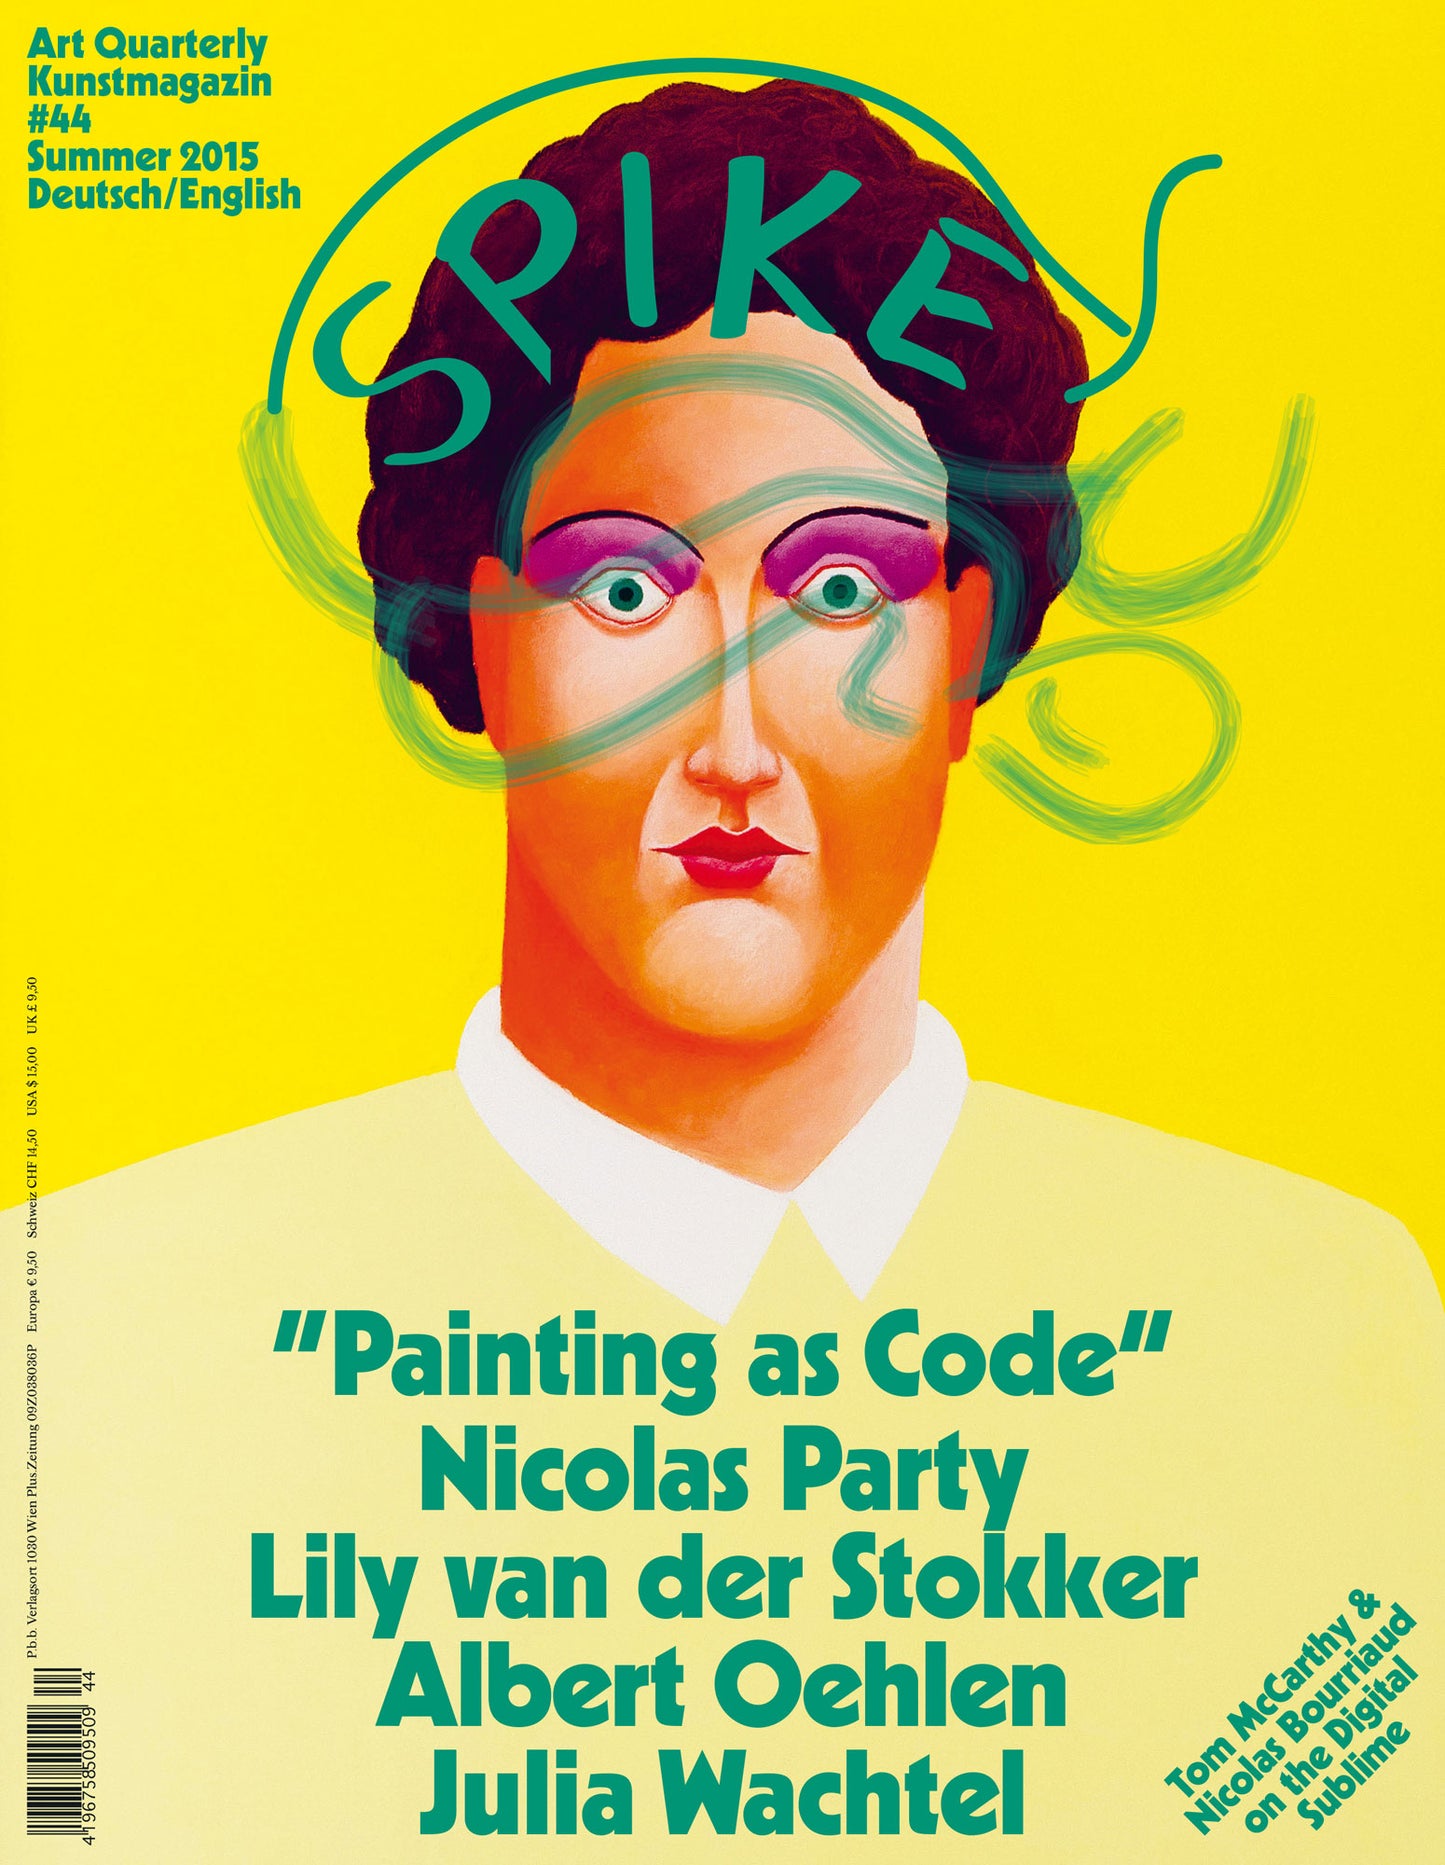 ISSUE 44 (SUMMER 2015): Painting as Code